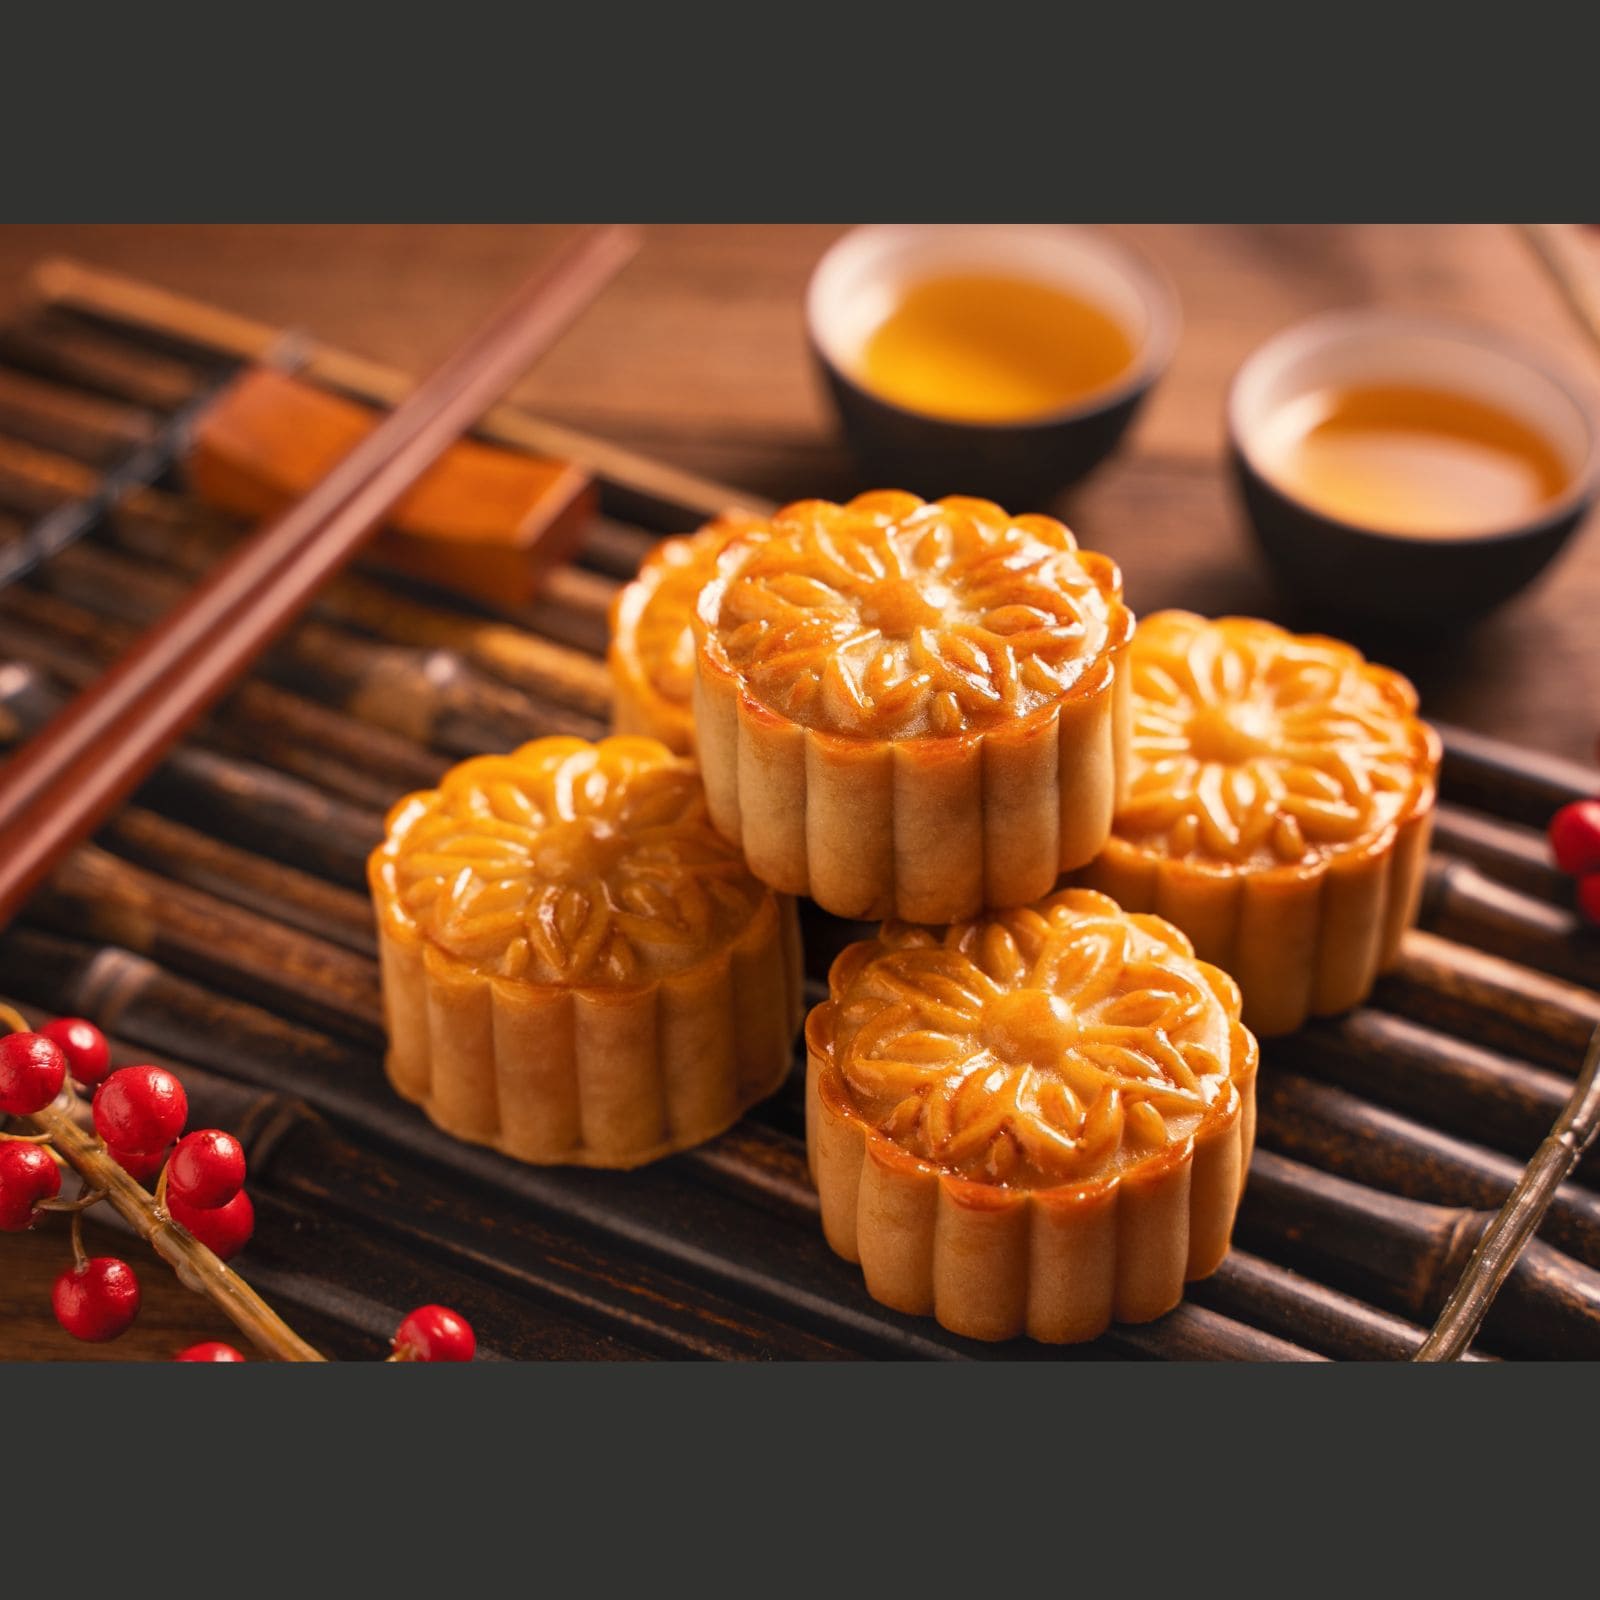 Mooncakes in China Are Getting a Luxury Makeover